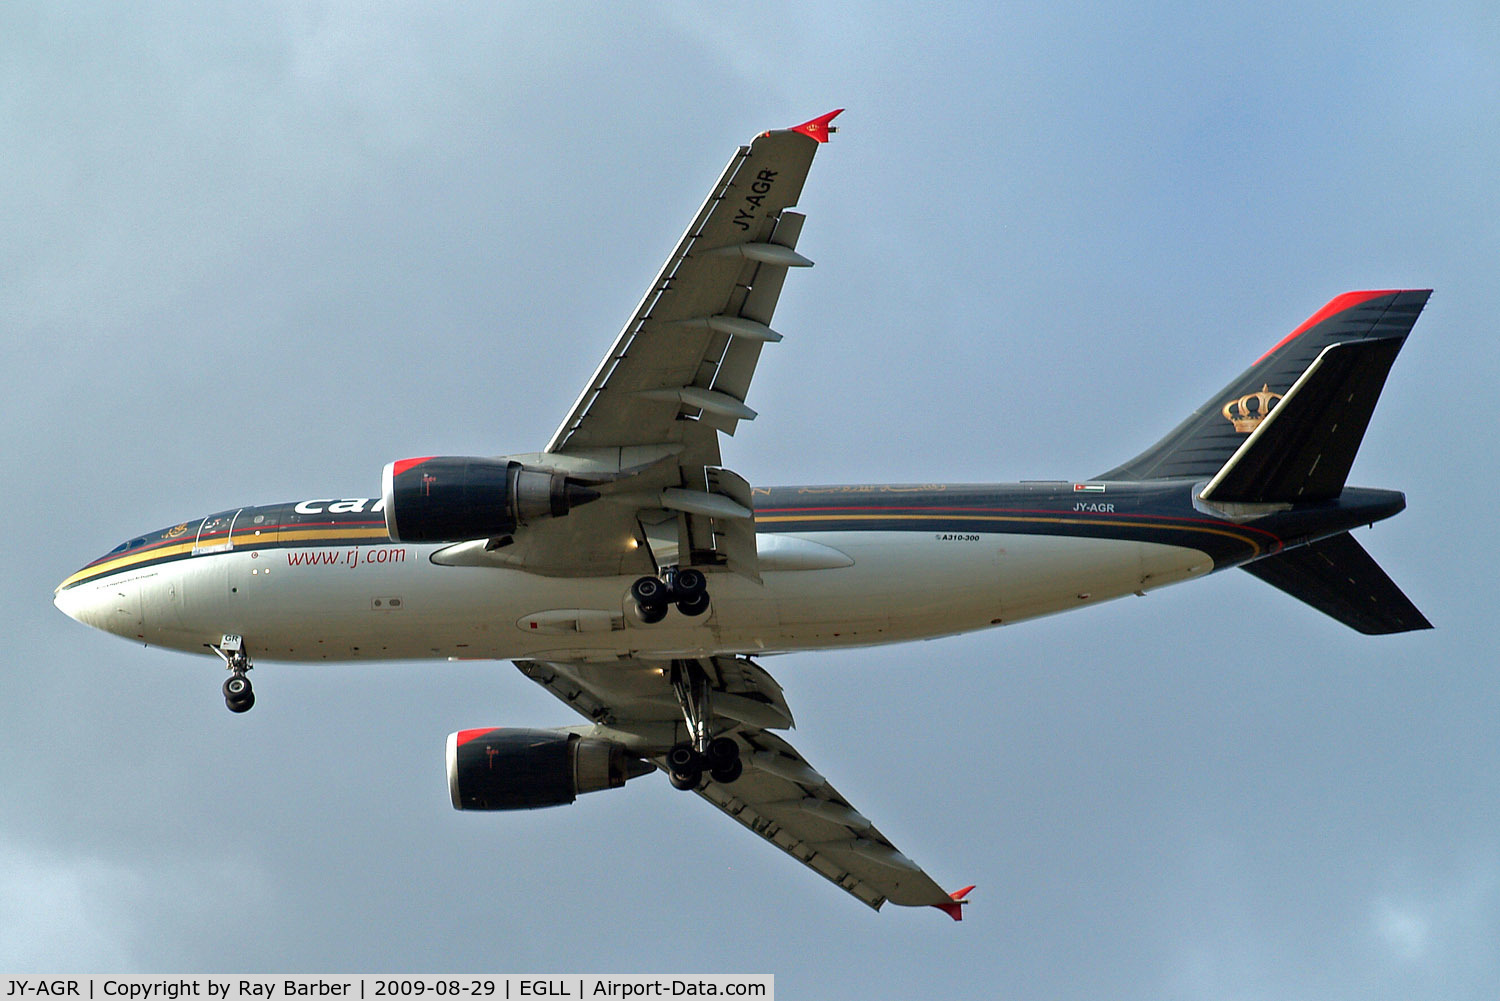 JY-AGR, 1988 Airbus A310-304(F) C/N 490/4451, Airbus A310-304F [490] (Royal Jordanian Airlines) Home~G 29/08/2009. On approach 27R.